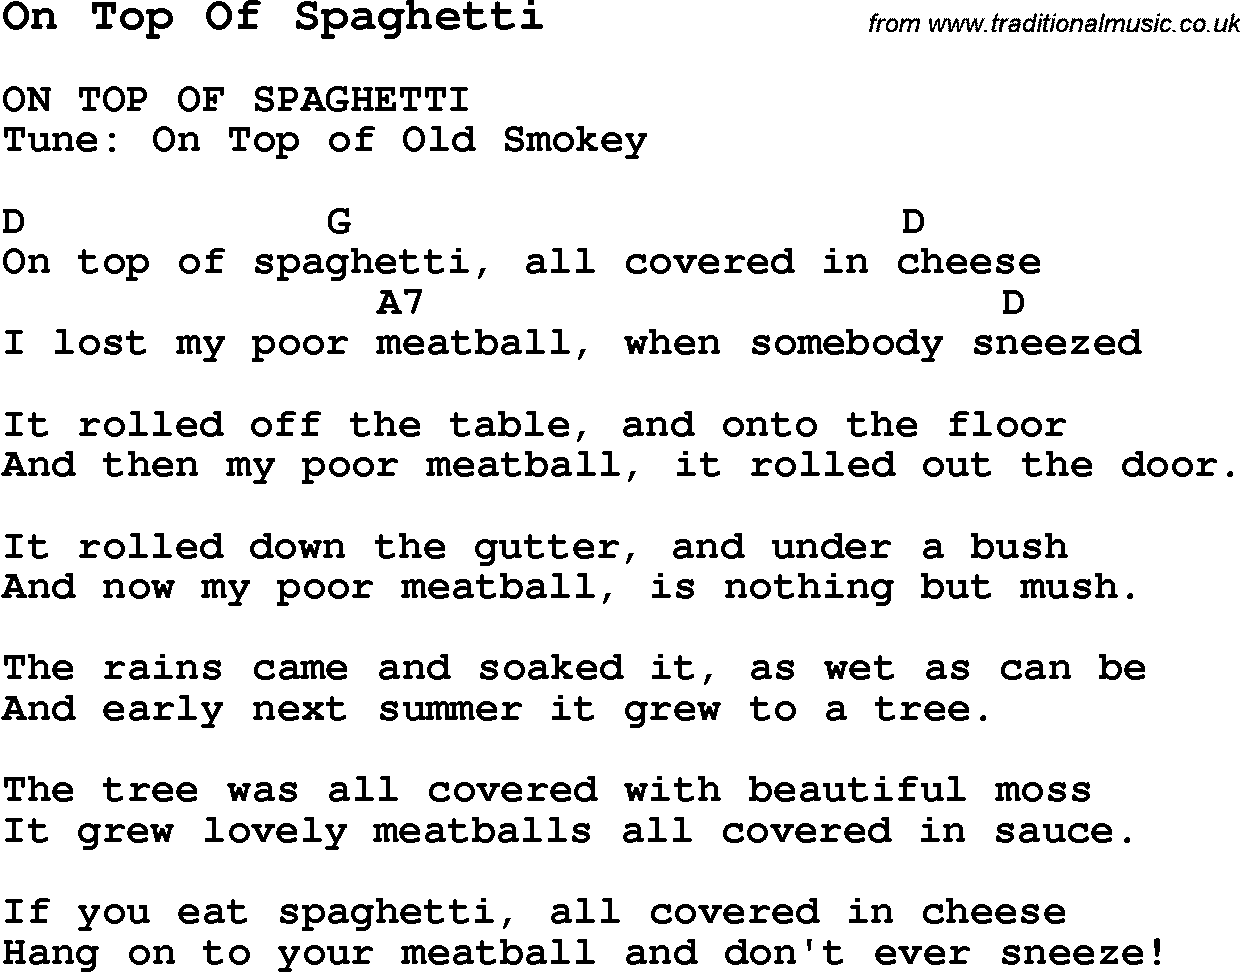 Summer-Camp Song, On Top Of Spaghetti, with lyrics and chords for Ukulele, Guitar Banjo etc.